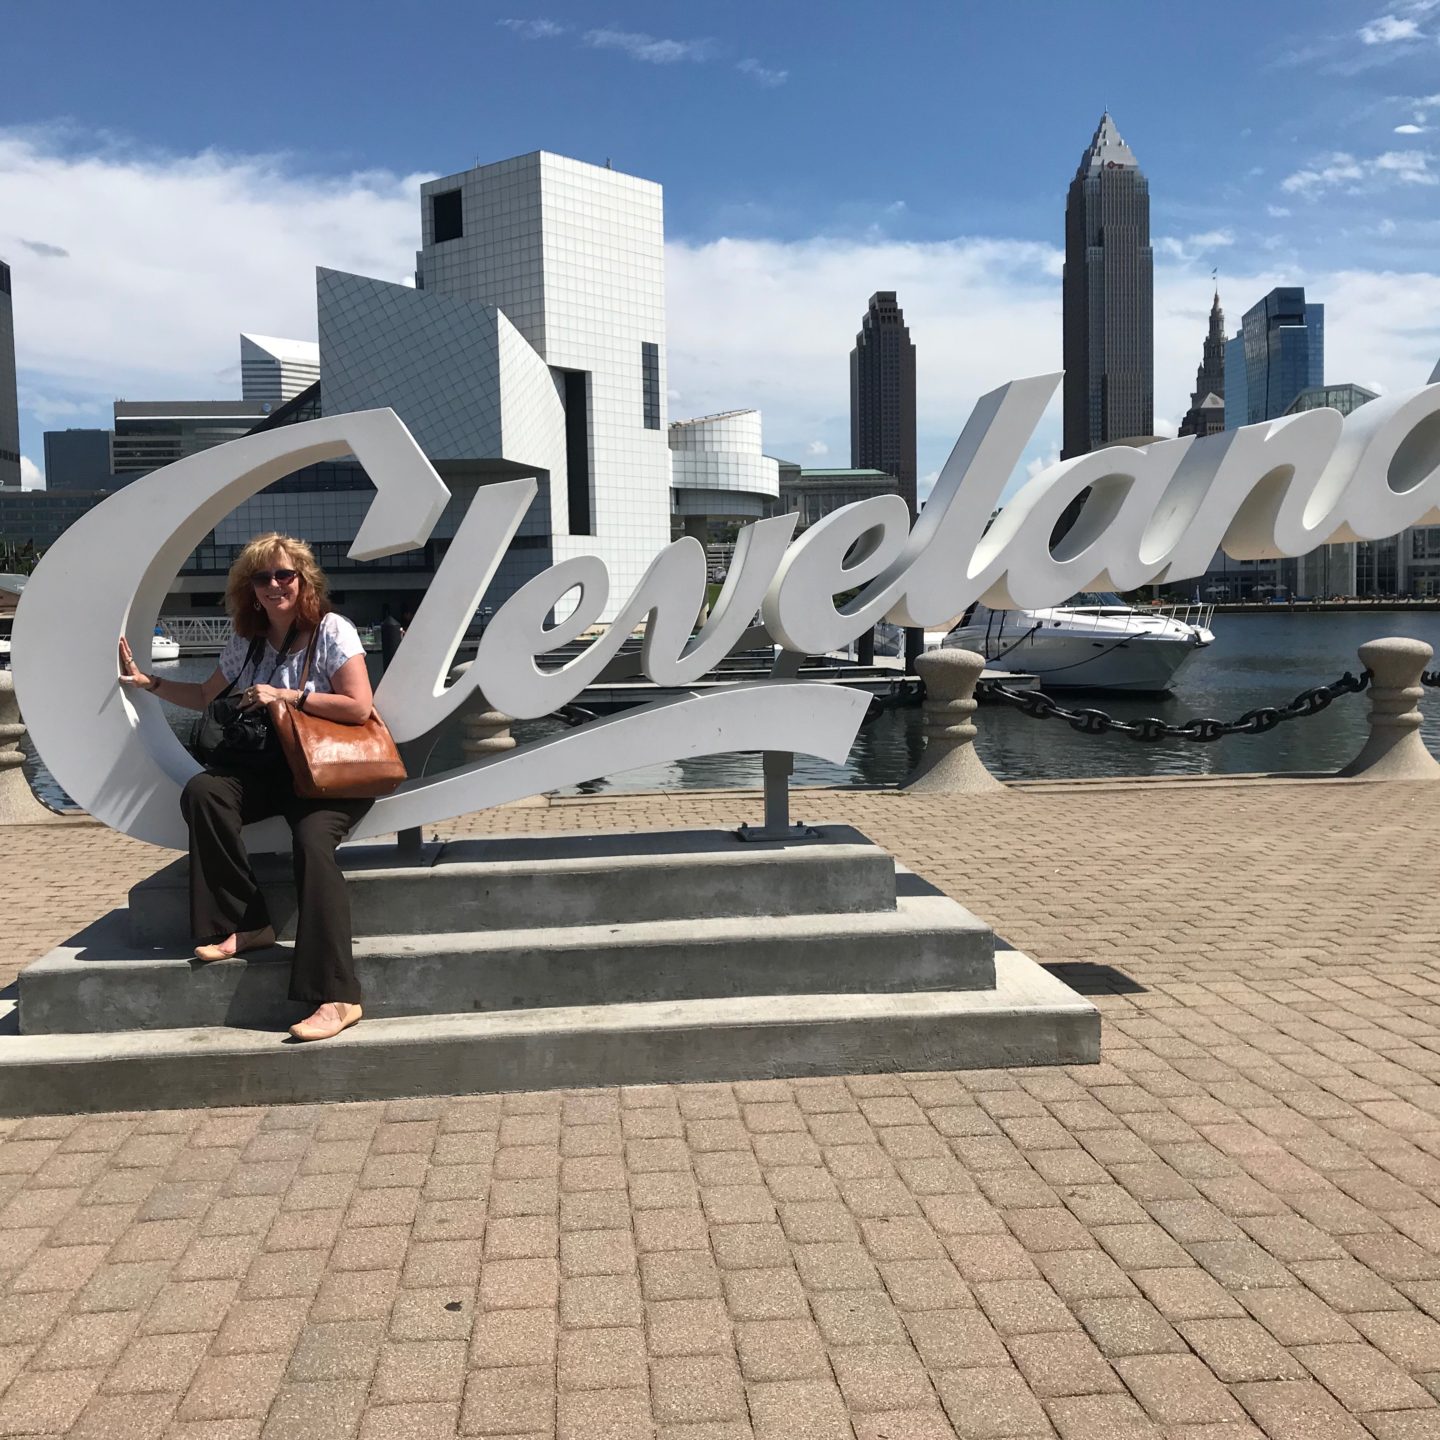 Cleveland was Never on My Bucket List